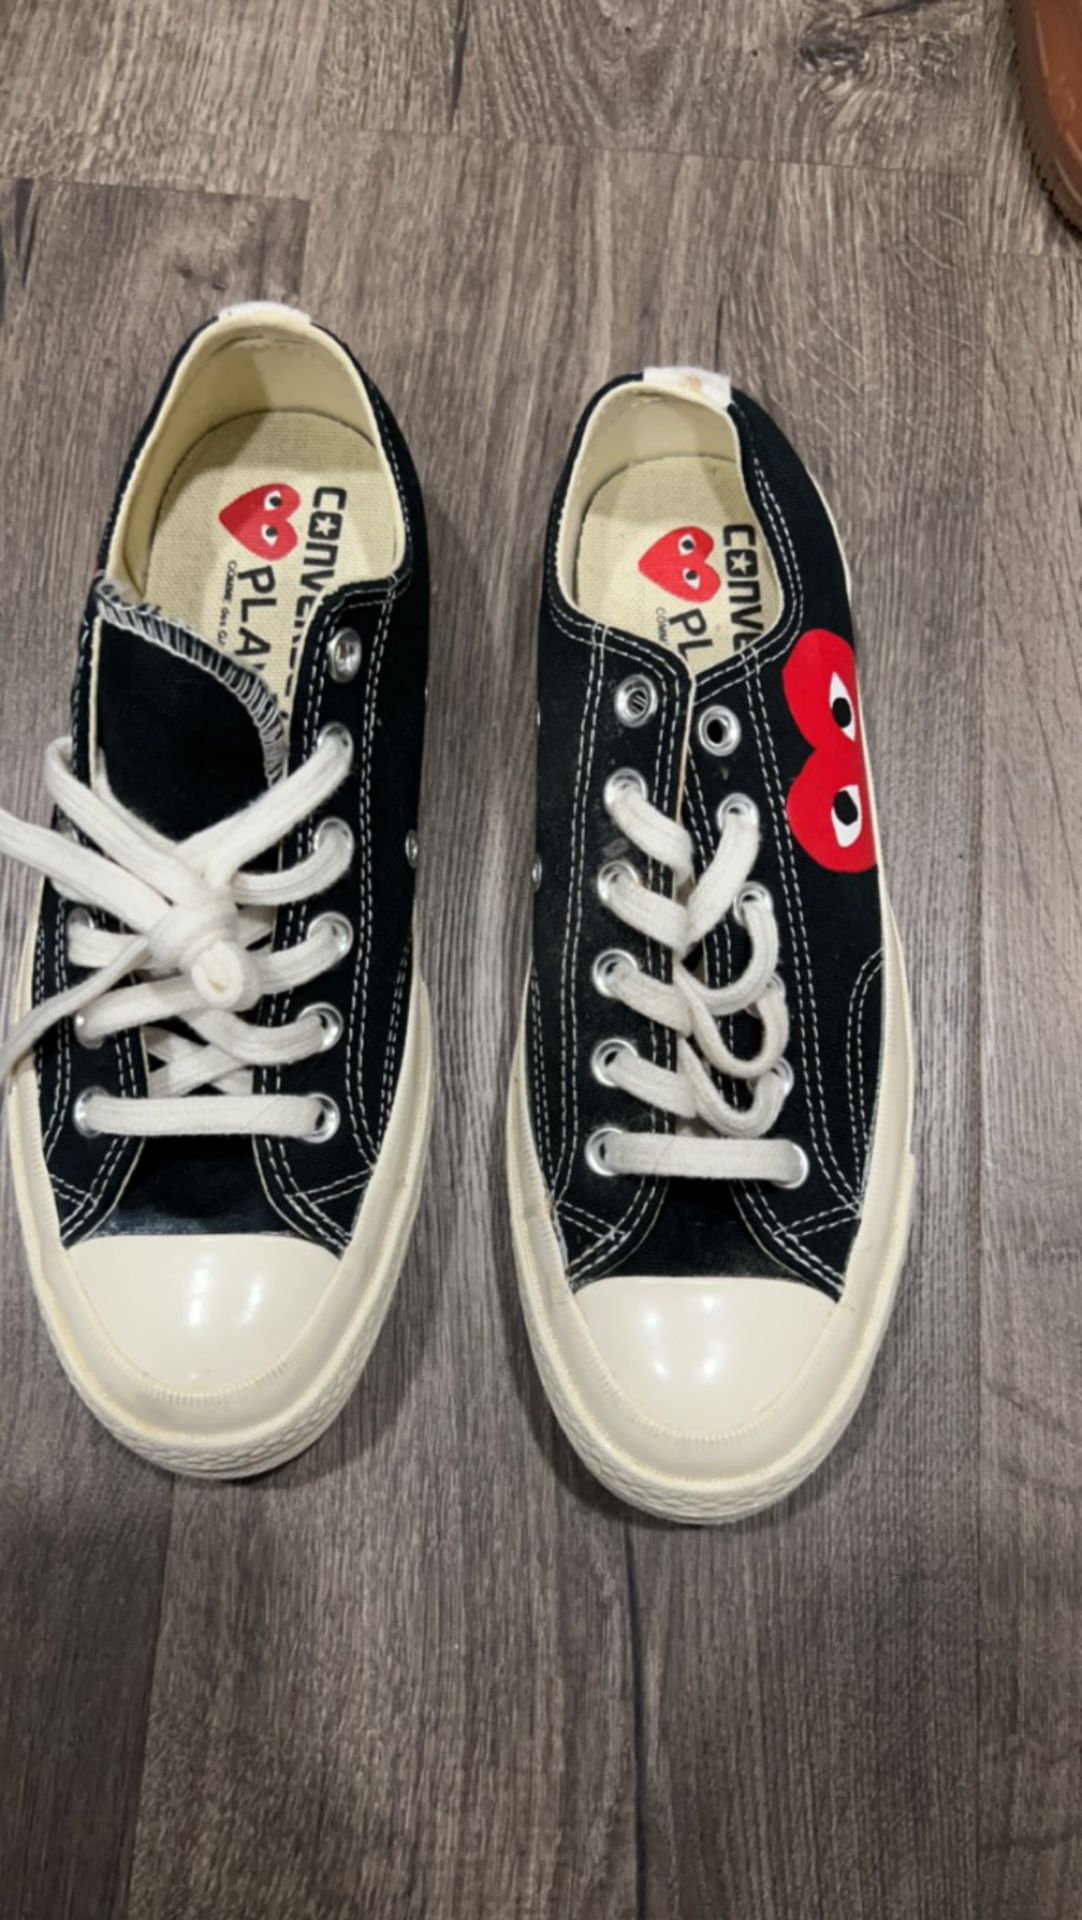 Cdg converse size 6